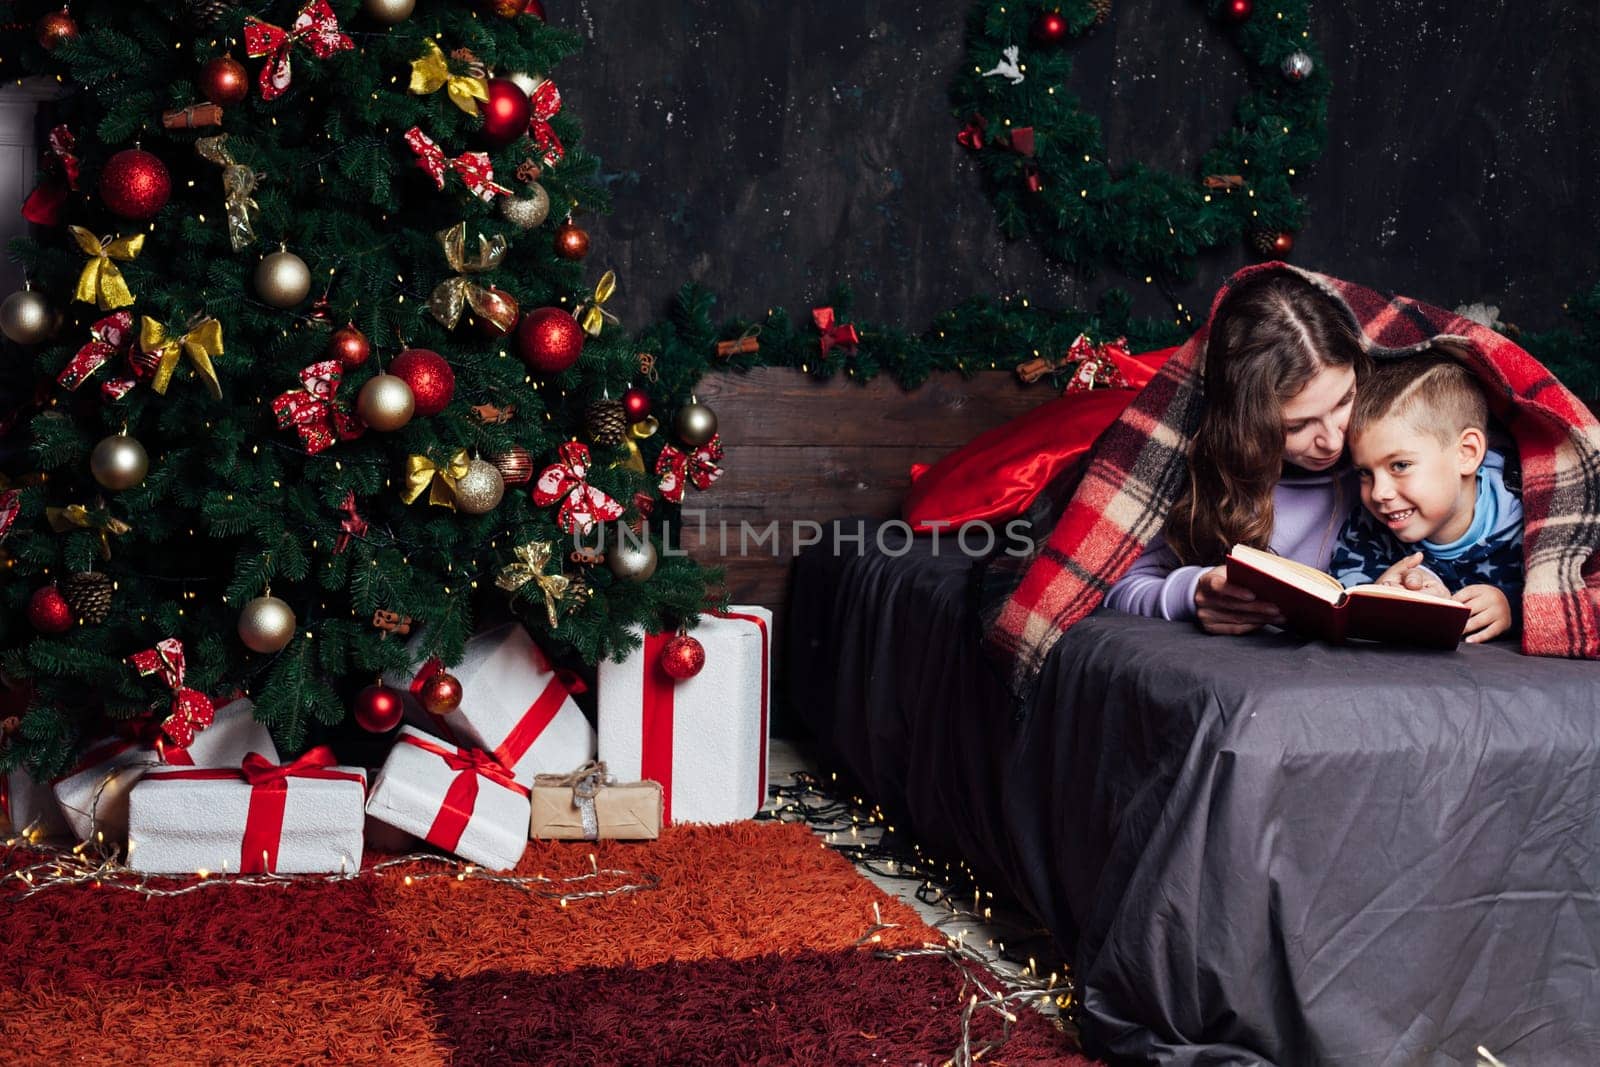 mother reads her son a book in bed before going to bed new year